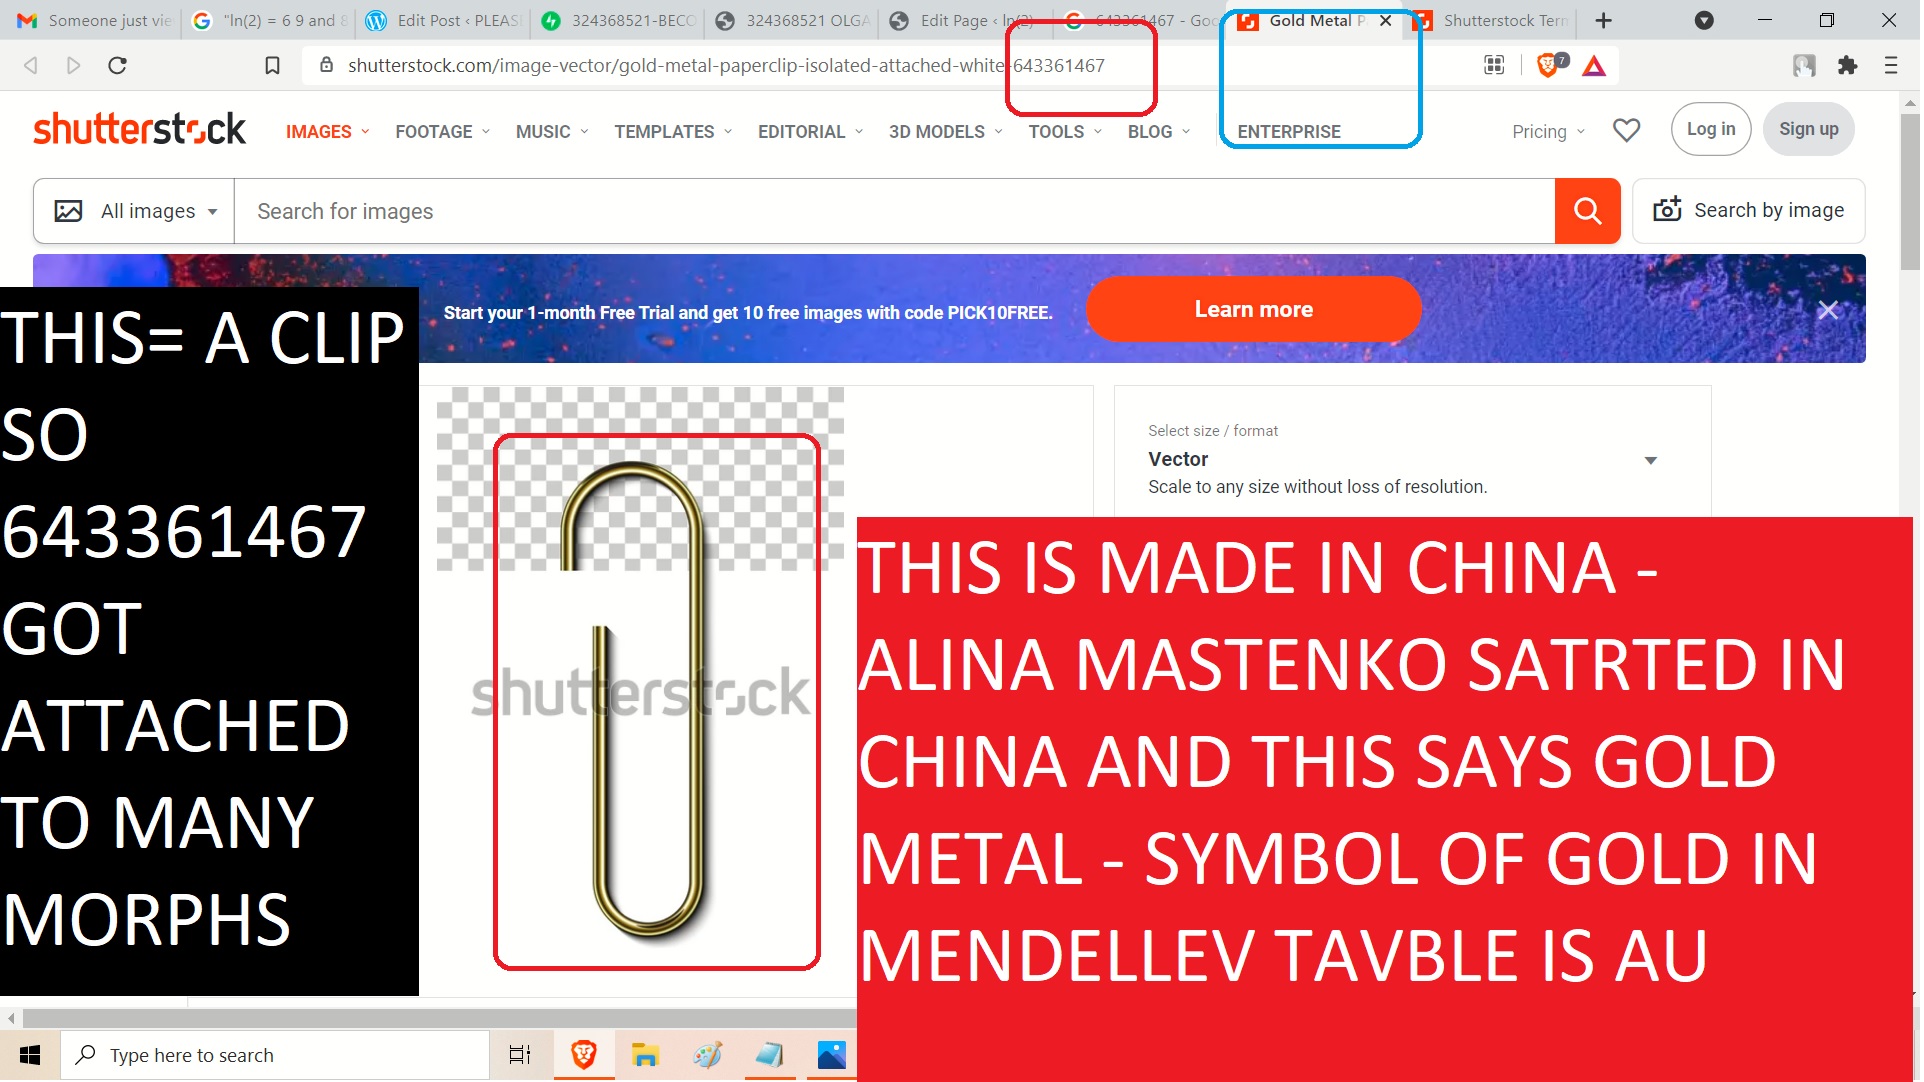 643361467 A CLIP MADE IN CHIN A- SO, THIS IS A GOLD CLIP - GLD = AU IN EMNDELEEV TABLE - THIS IS A CLIP THIS GOT ASTATACHED TO MANY MORPHS